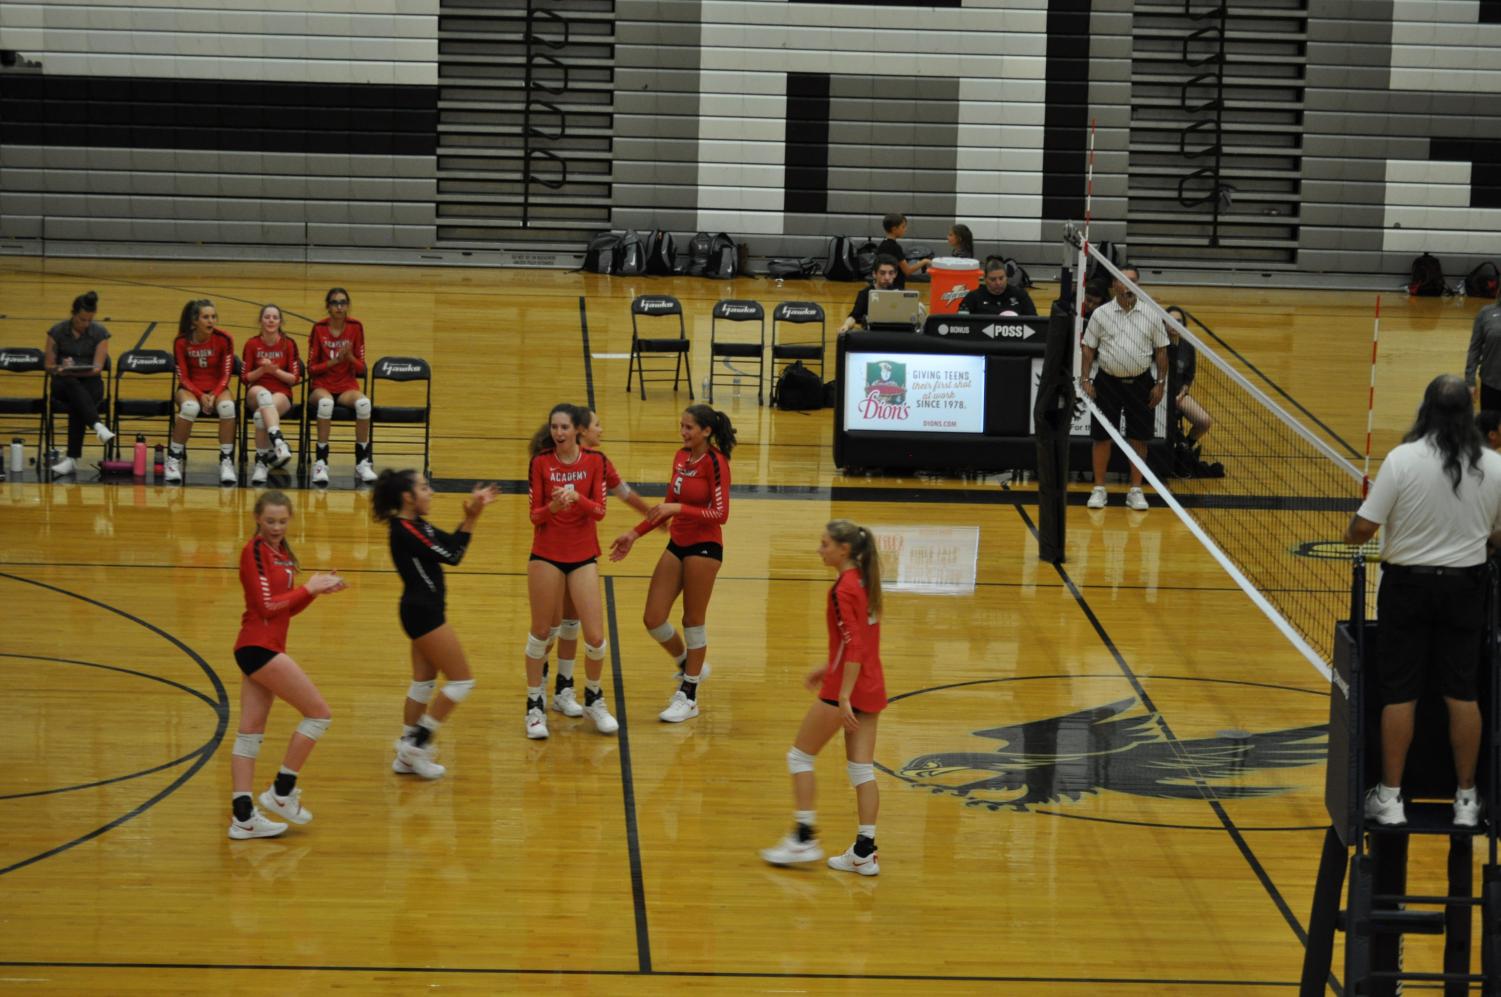 Volleyball+Mid-Season+Recap%3A+Volleyball+Team+is+on+the+Rise